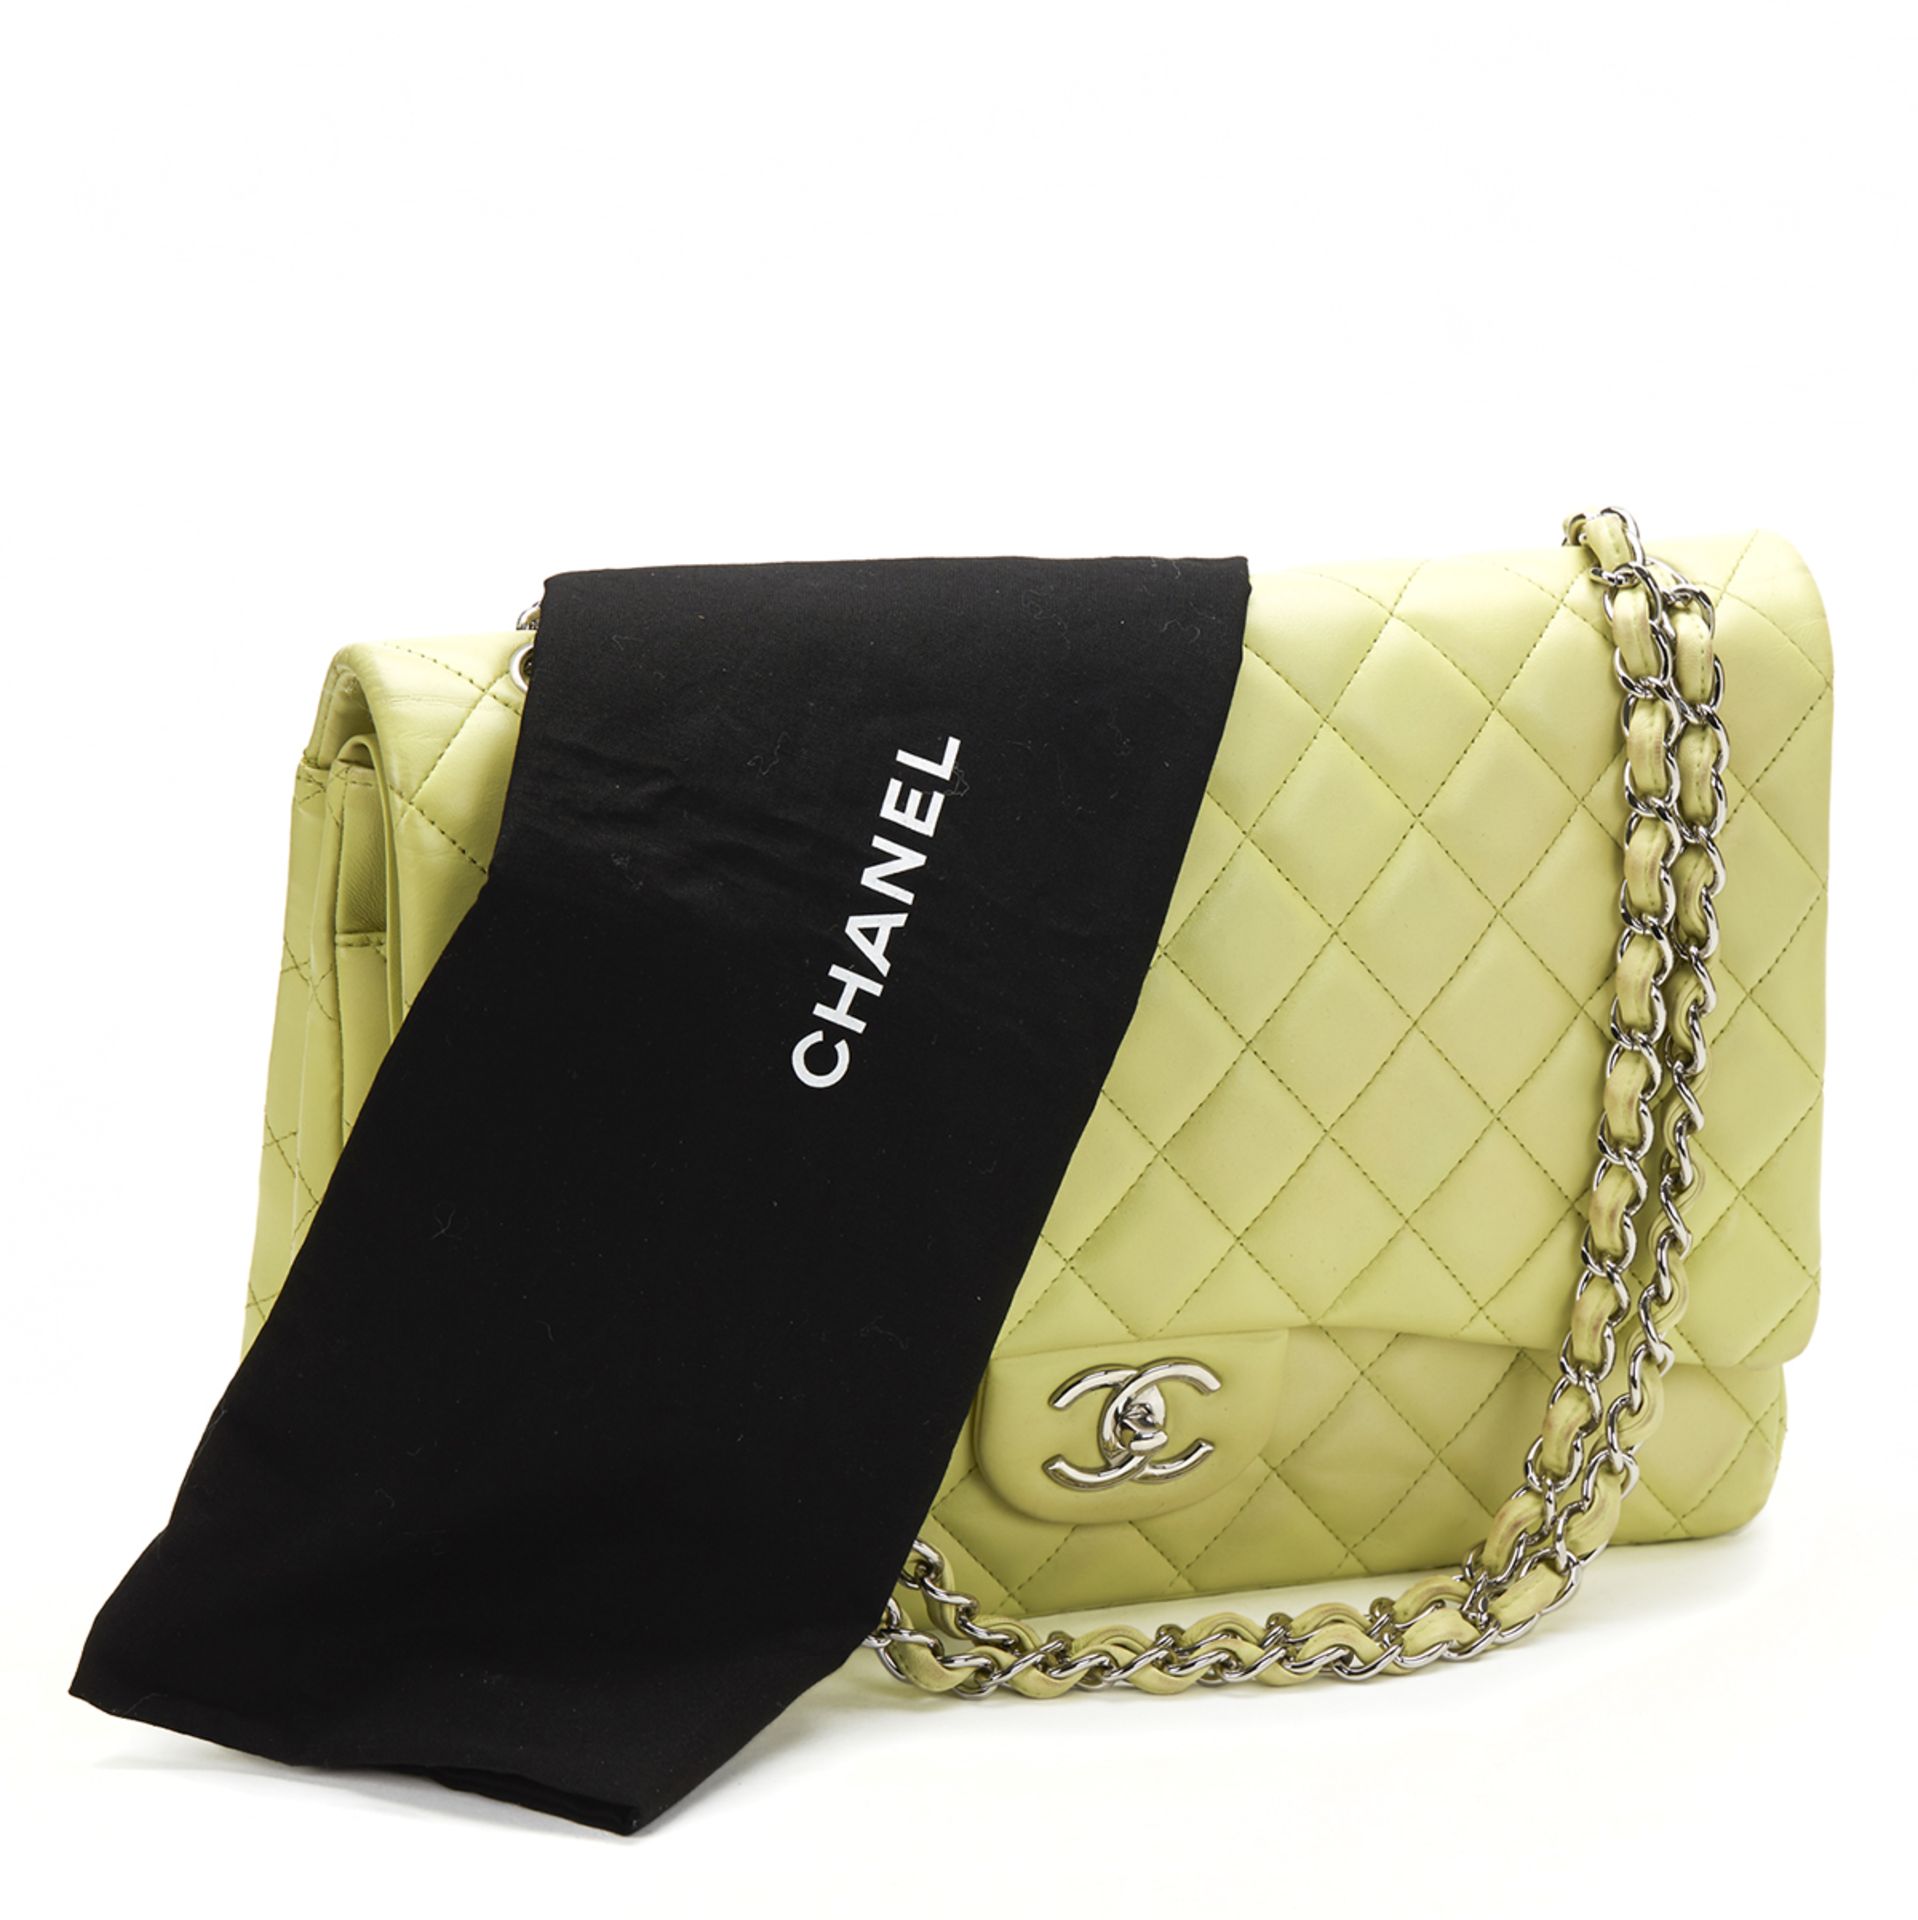 CHANEL, Maxi Classic Double Flap Bag - Image 11 of 12